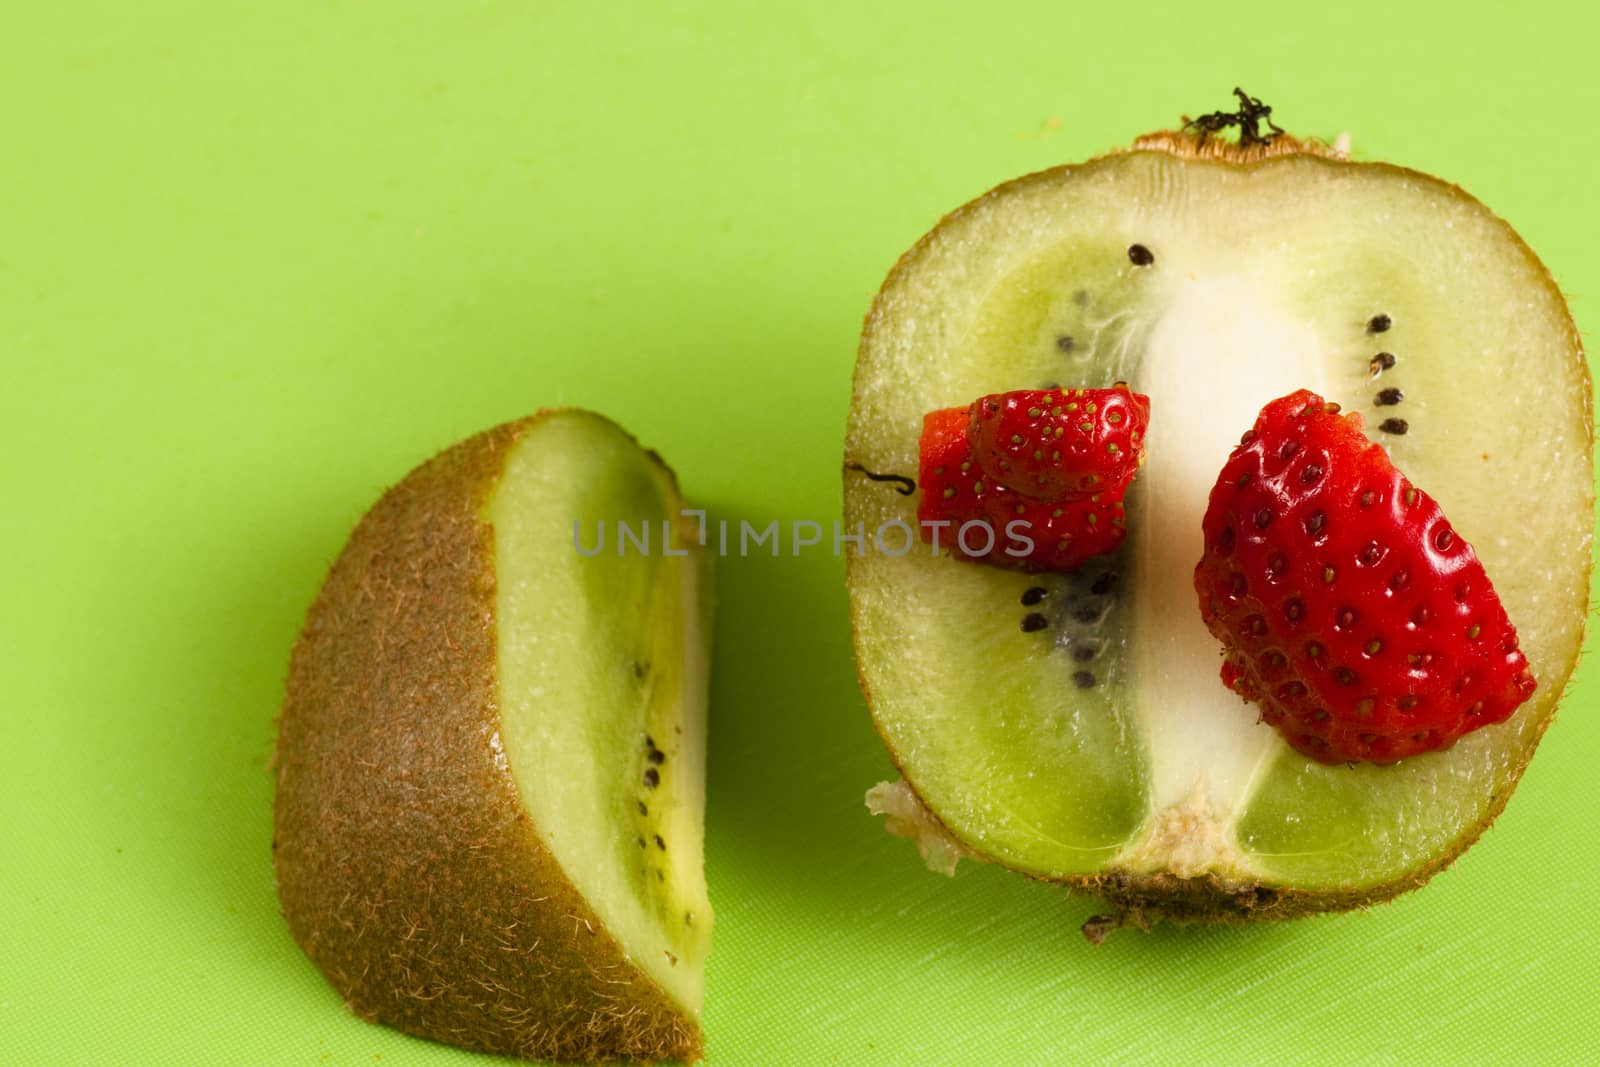 kiwi in half with over strawberries served on a green floor